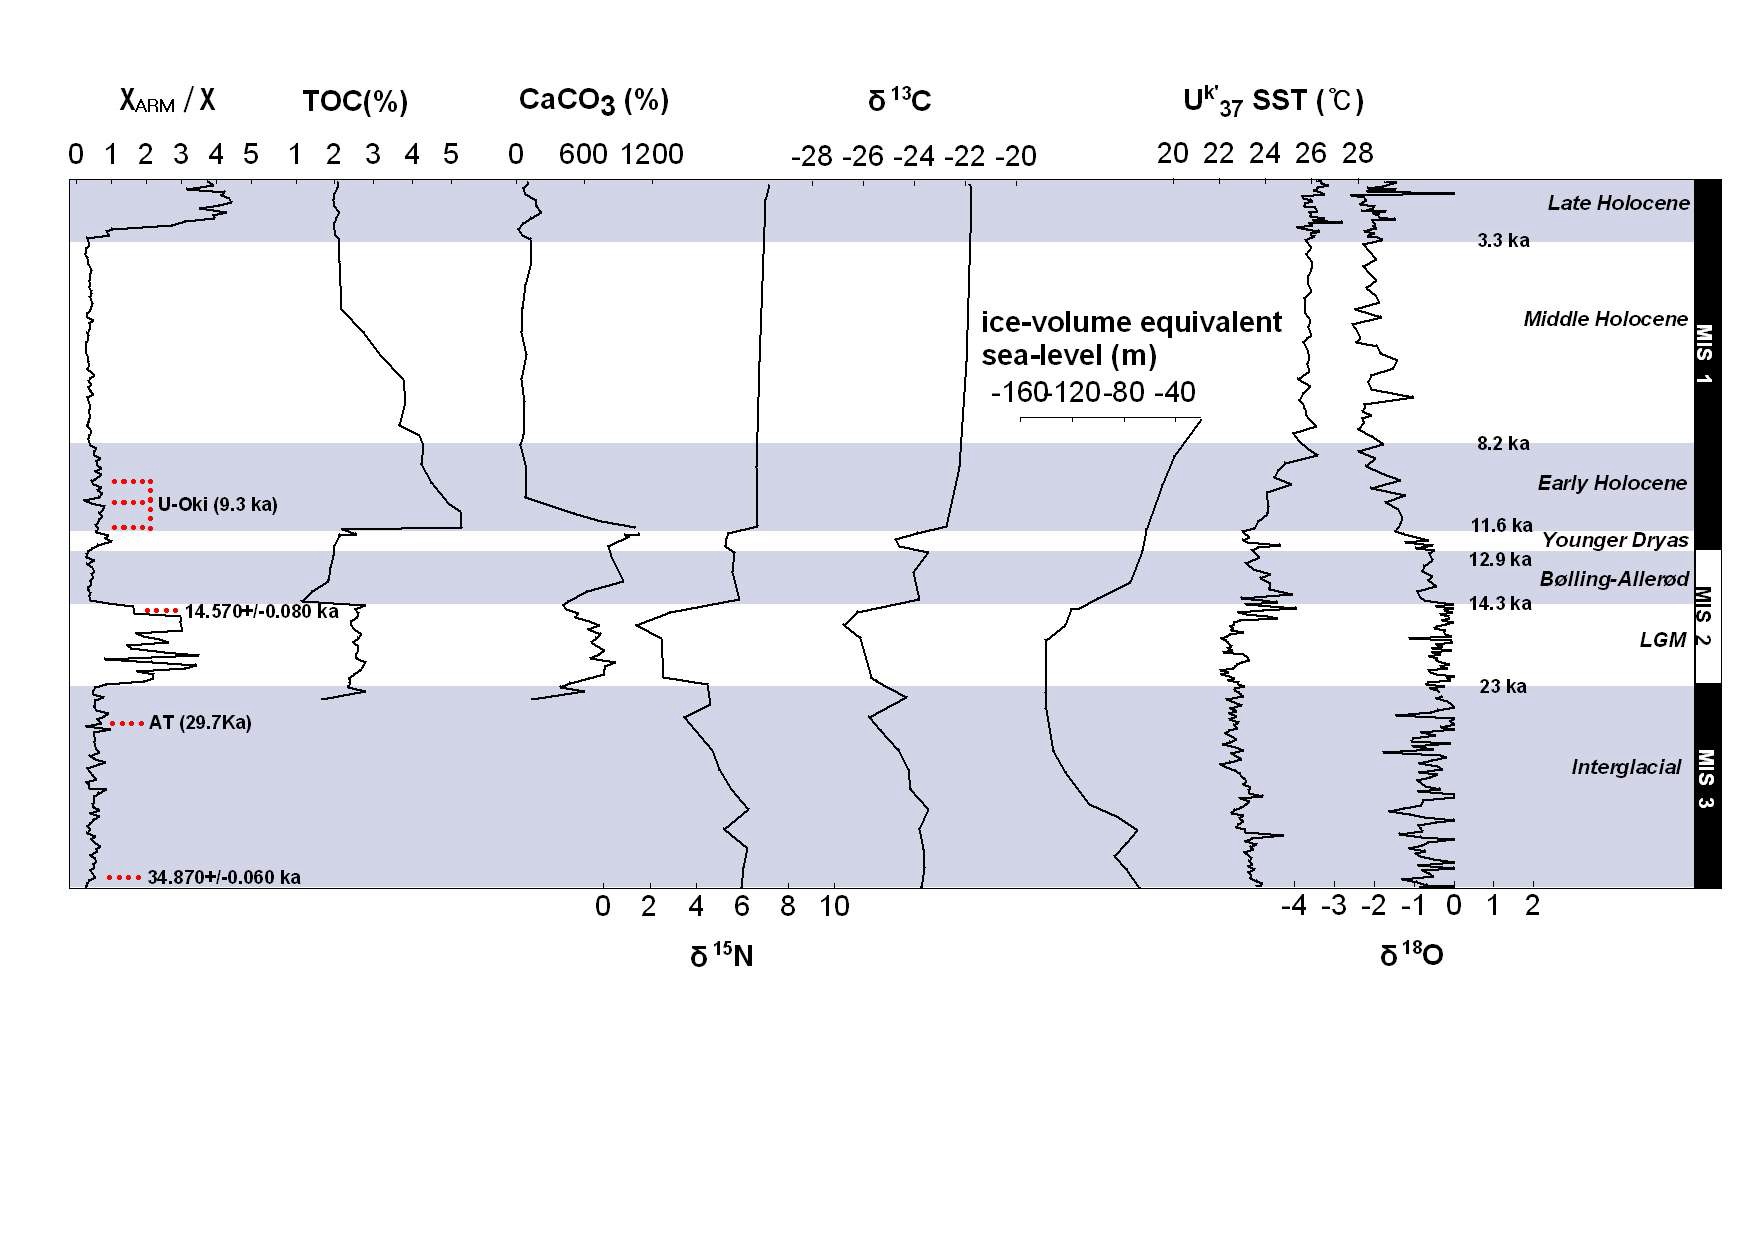 Fig. 3 Comparison of χARM/χ with sedimentary proxyrecords from East sea and other areas.